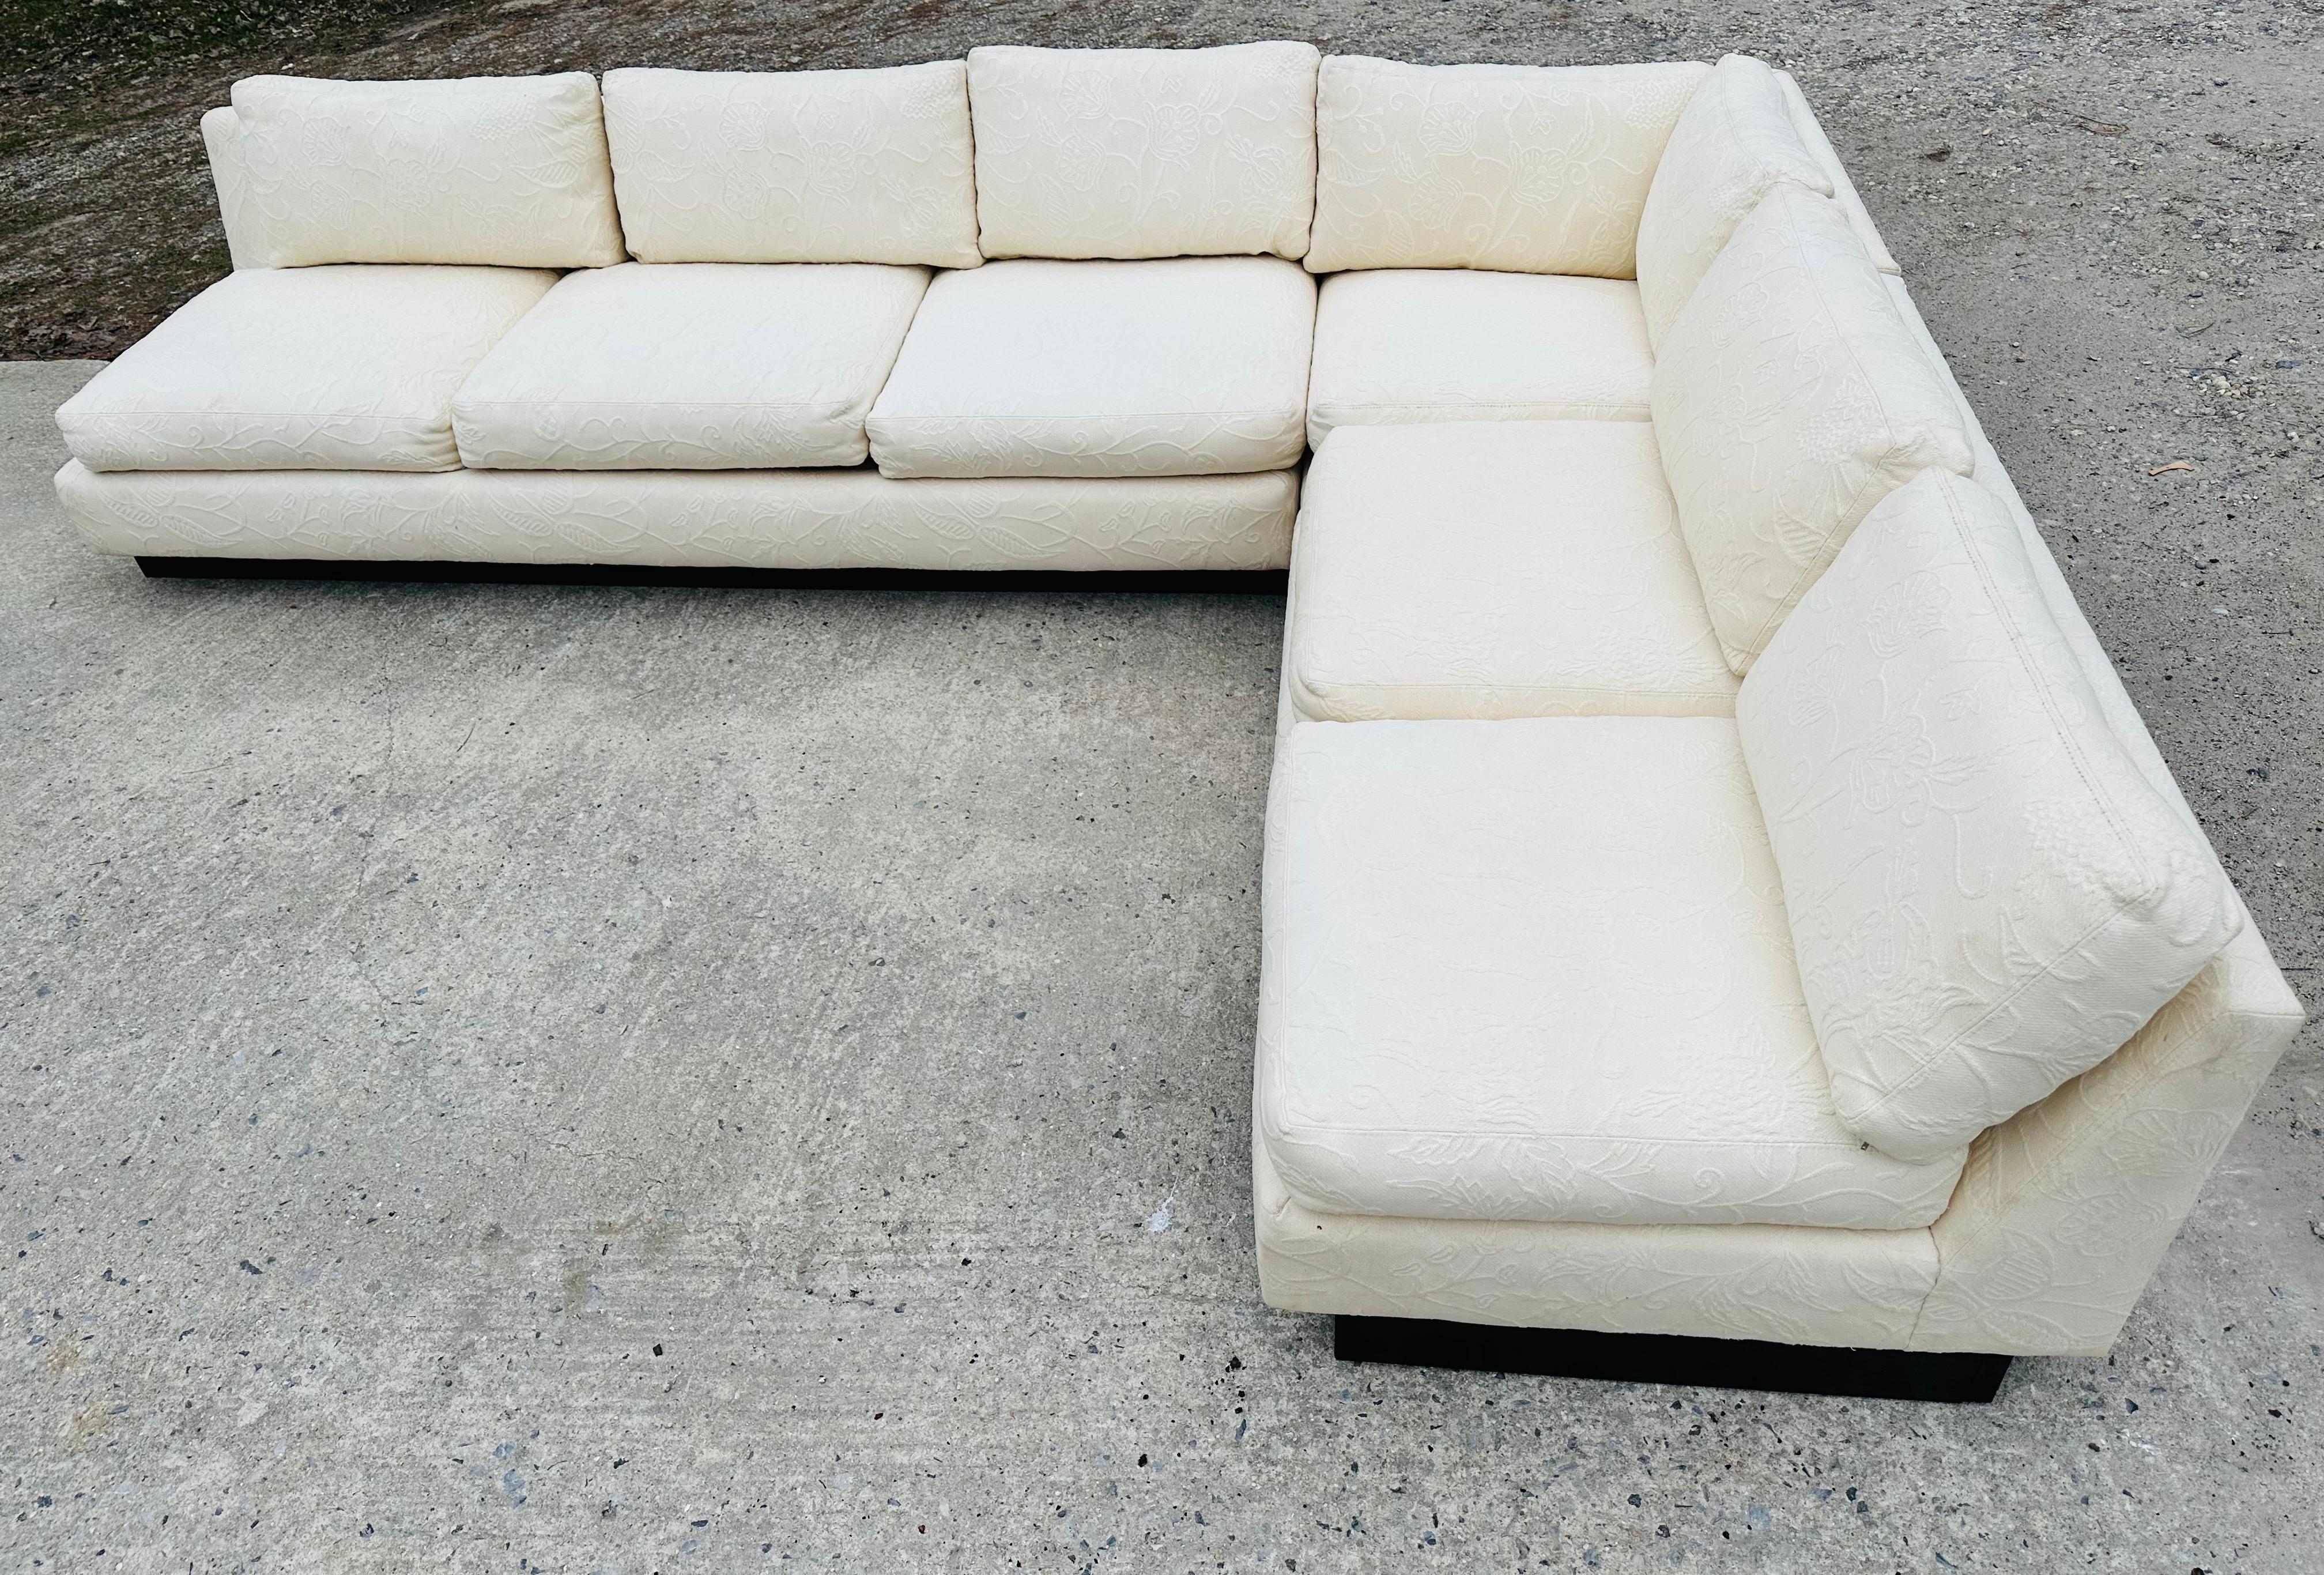 This listing is for a Mid-Century Modern sectional sofa. Featuring an off-white floral upholstery, three pieces that connect into an L-Shaped armless Milo Baughman style design, removal cushions, and a black plinth base.